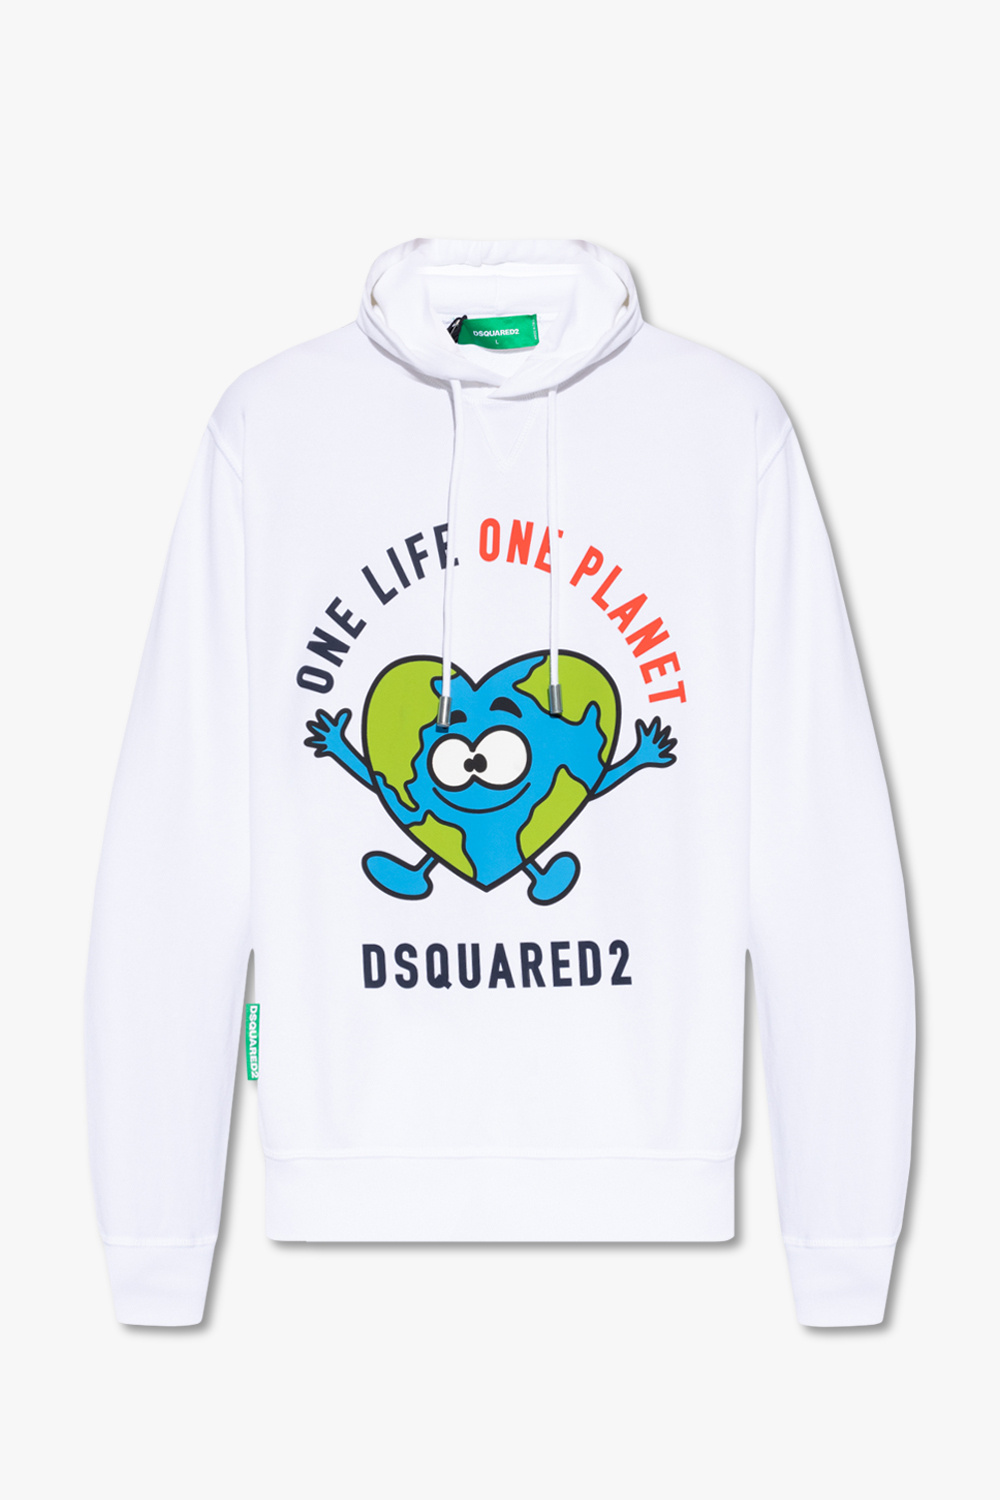 Dsquared2 'One Life One Planet' collection hoodie | Men's Clothing